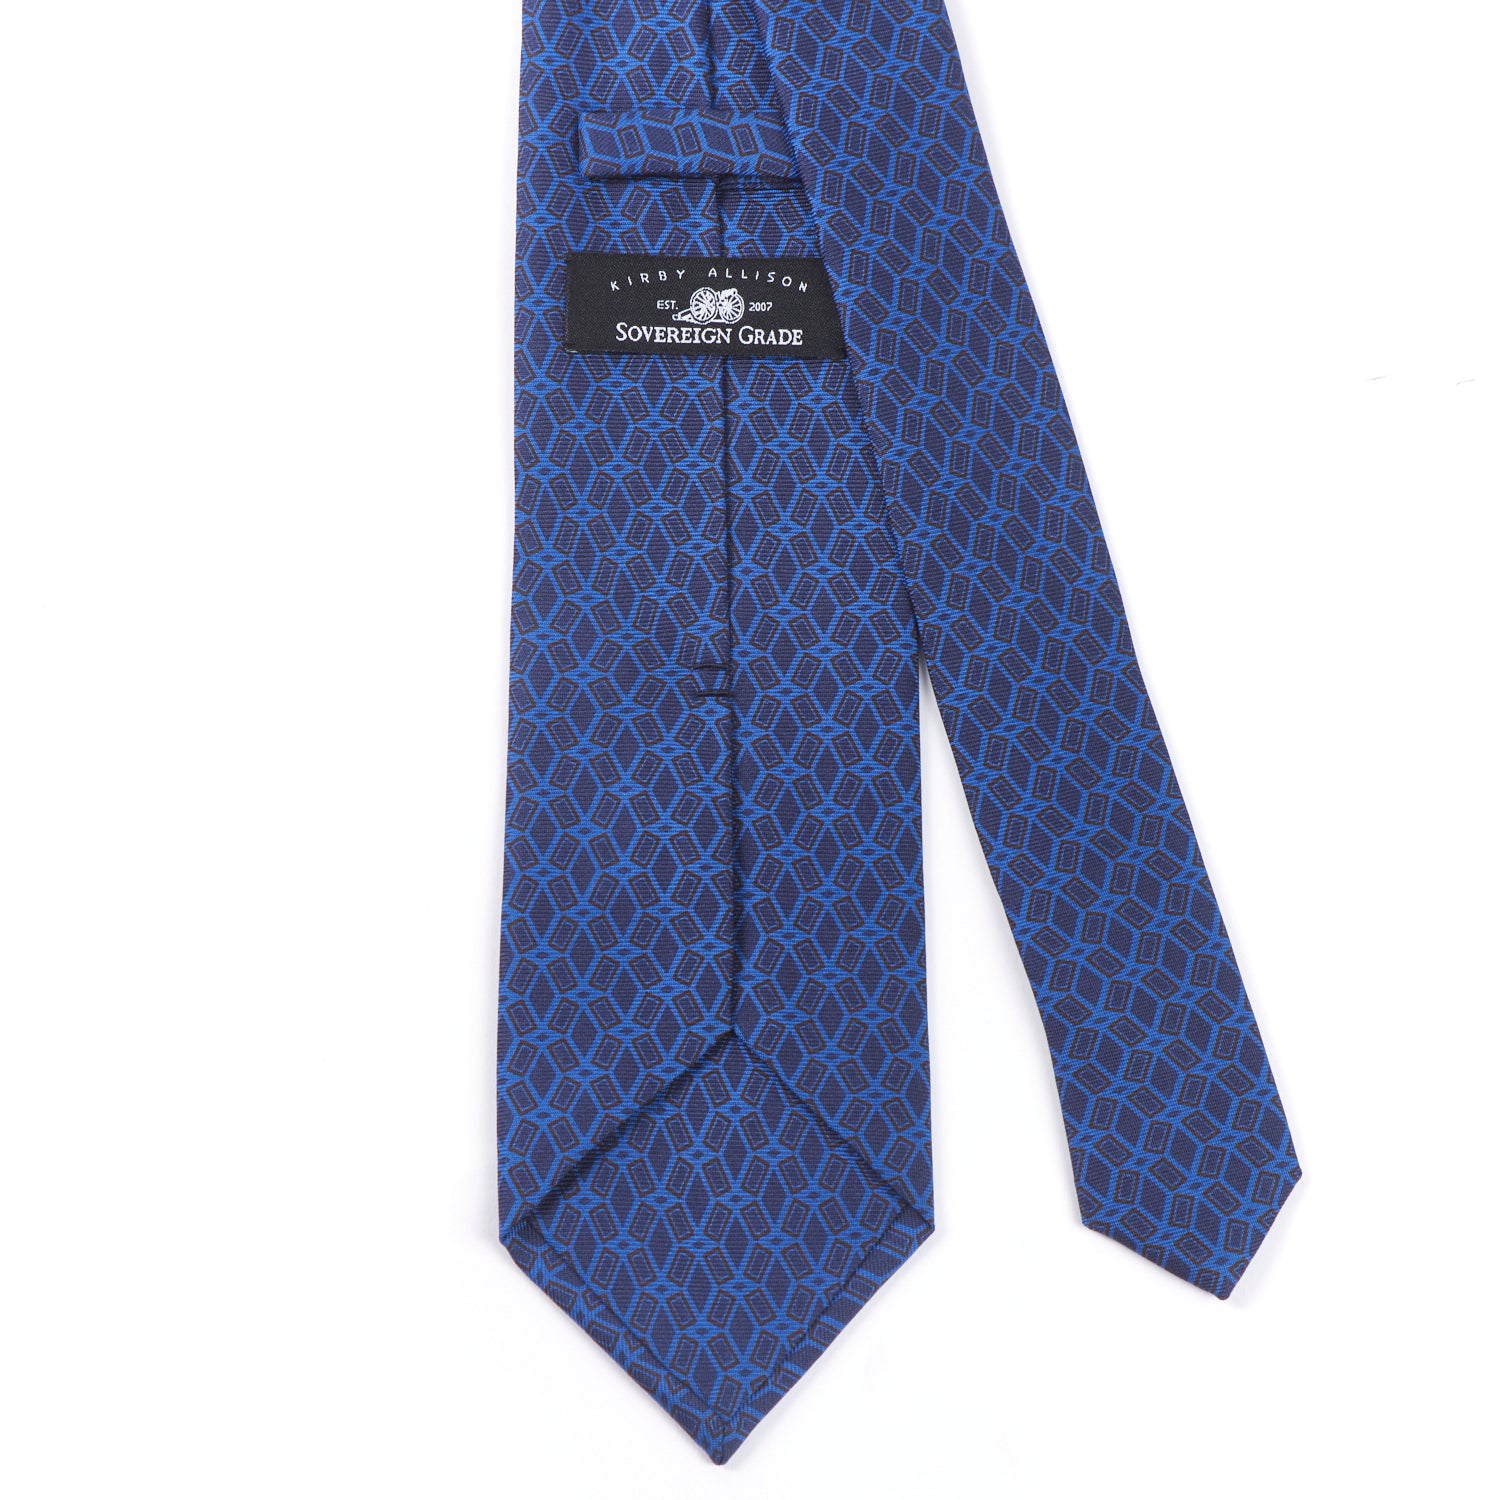 A KirbyAllison.com Sovereign Grade Lido Burgundy Ancient Madder Tie, 150cm, with a classic black and blue pattern.